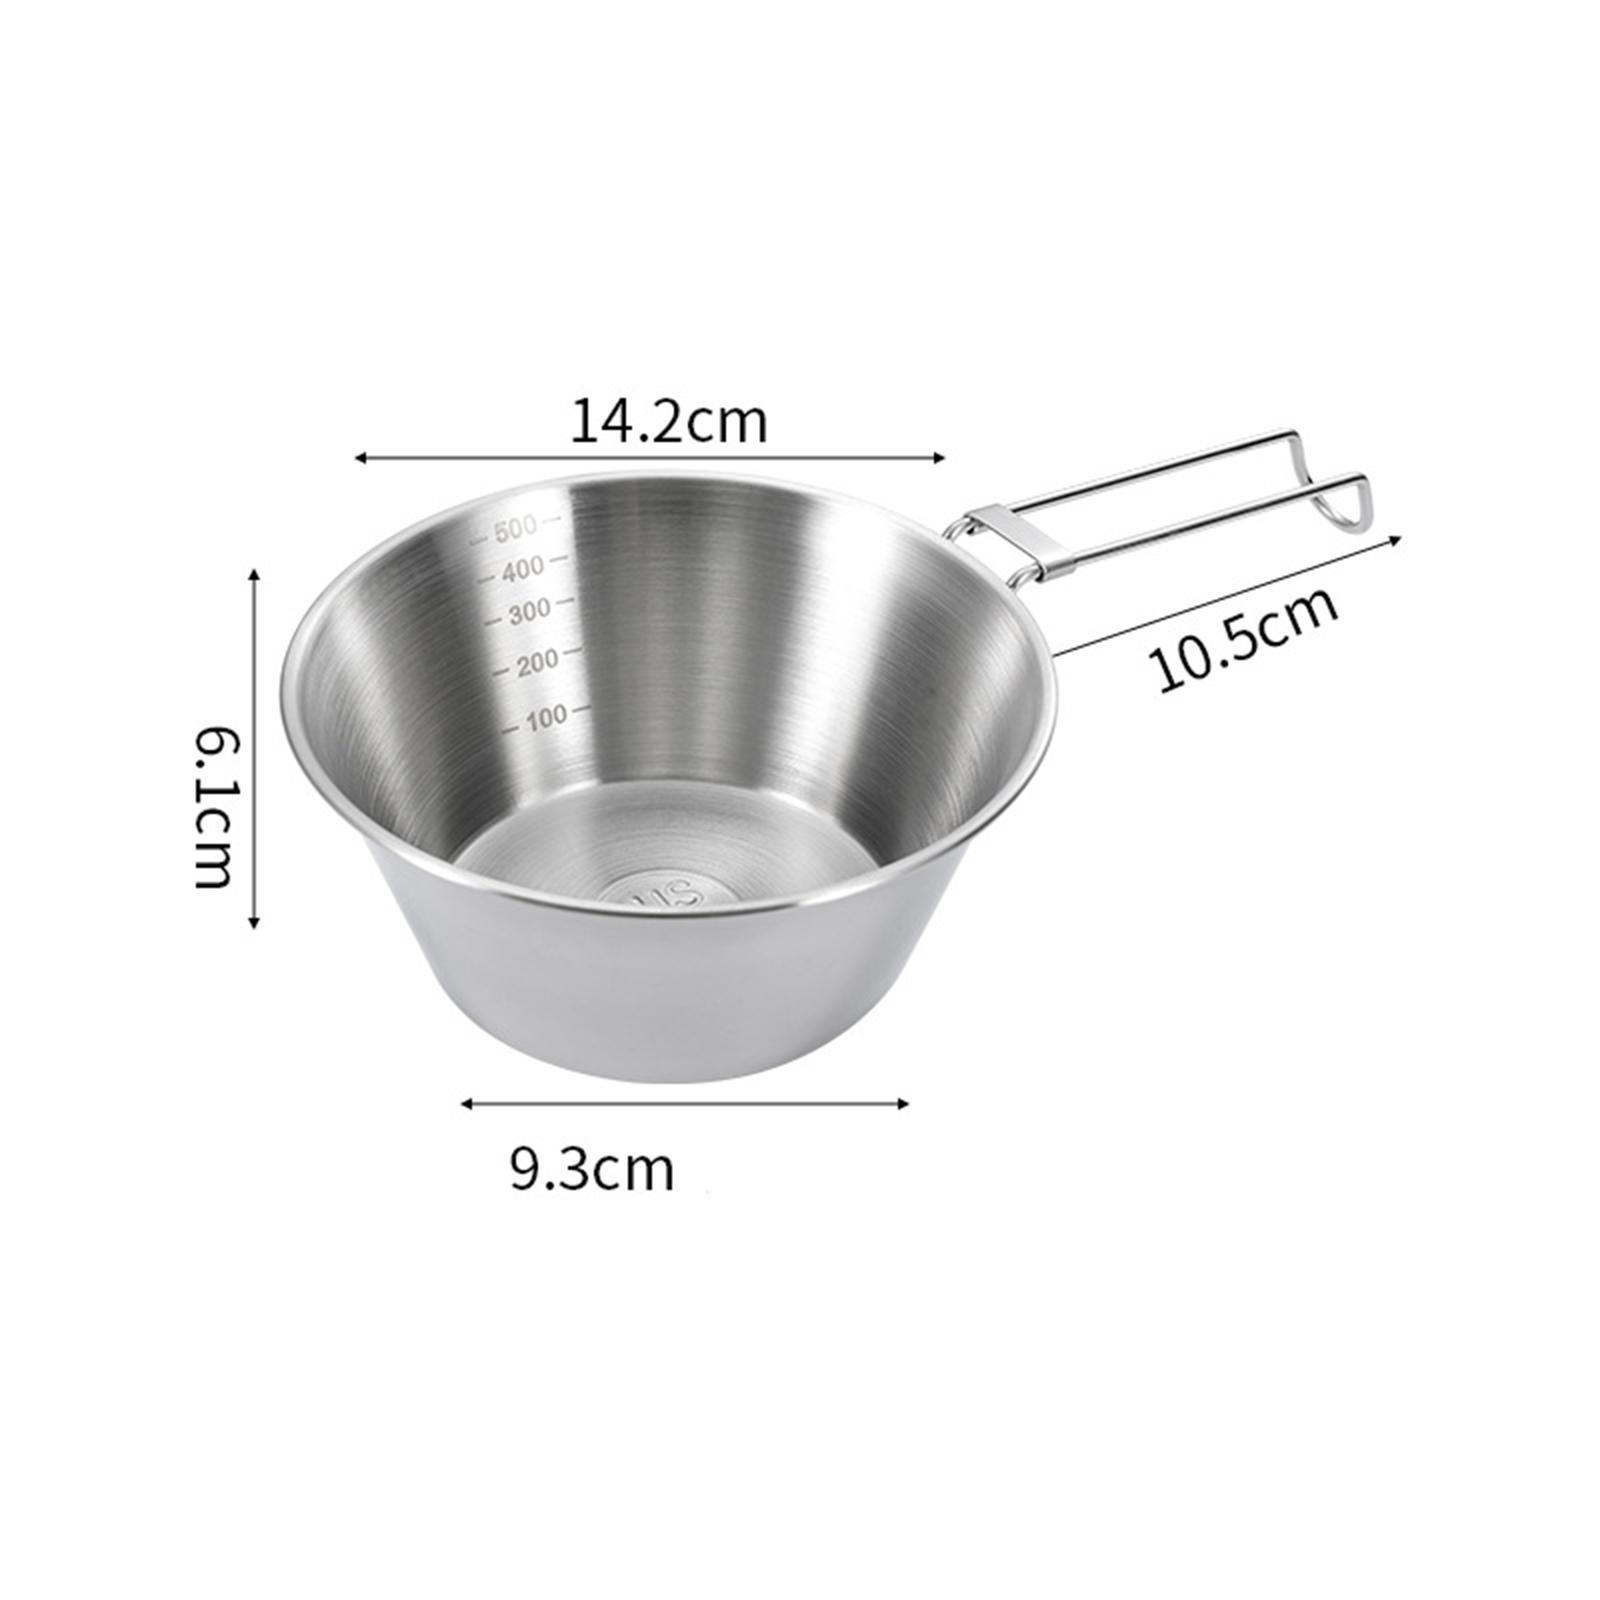 Camping Bowl Dinnerware Food Drink Container Cooking Portable Lightweight Tableware Cookware Outdoor Bowl for BBQ, Kitchen, Beach, Picnic